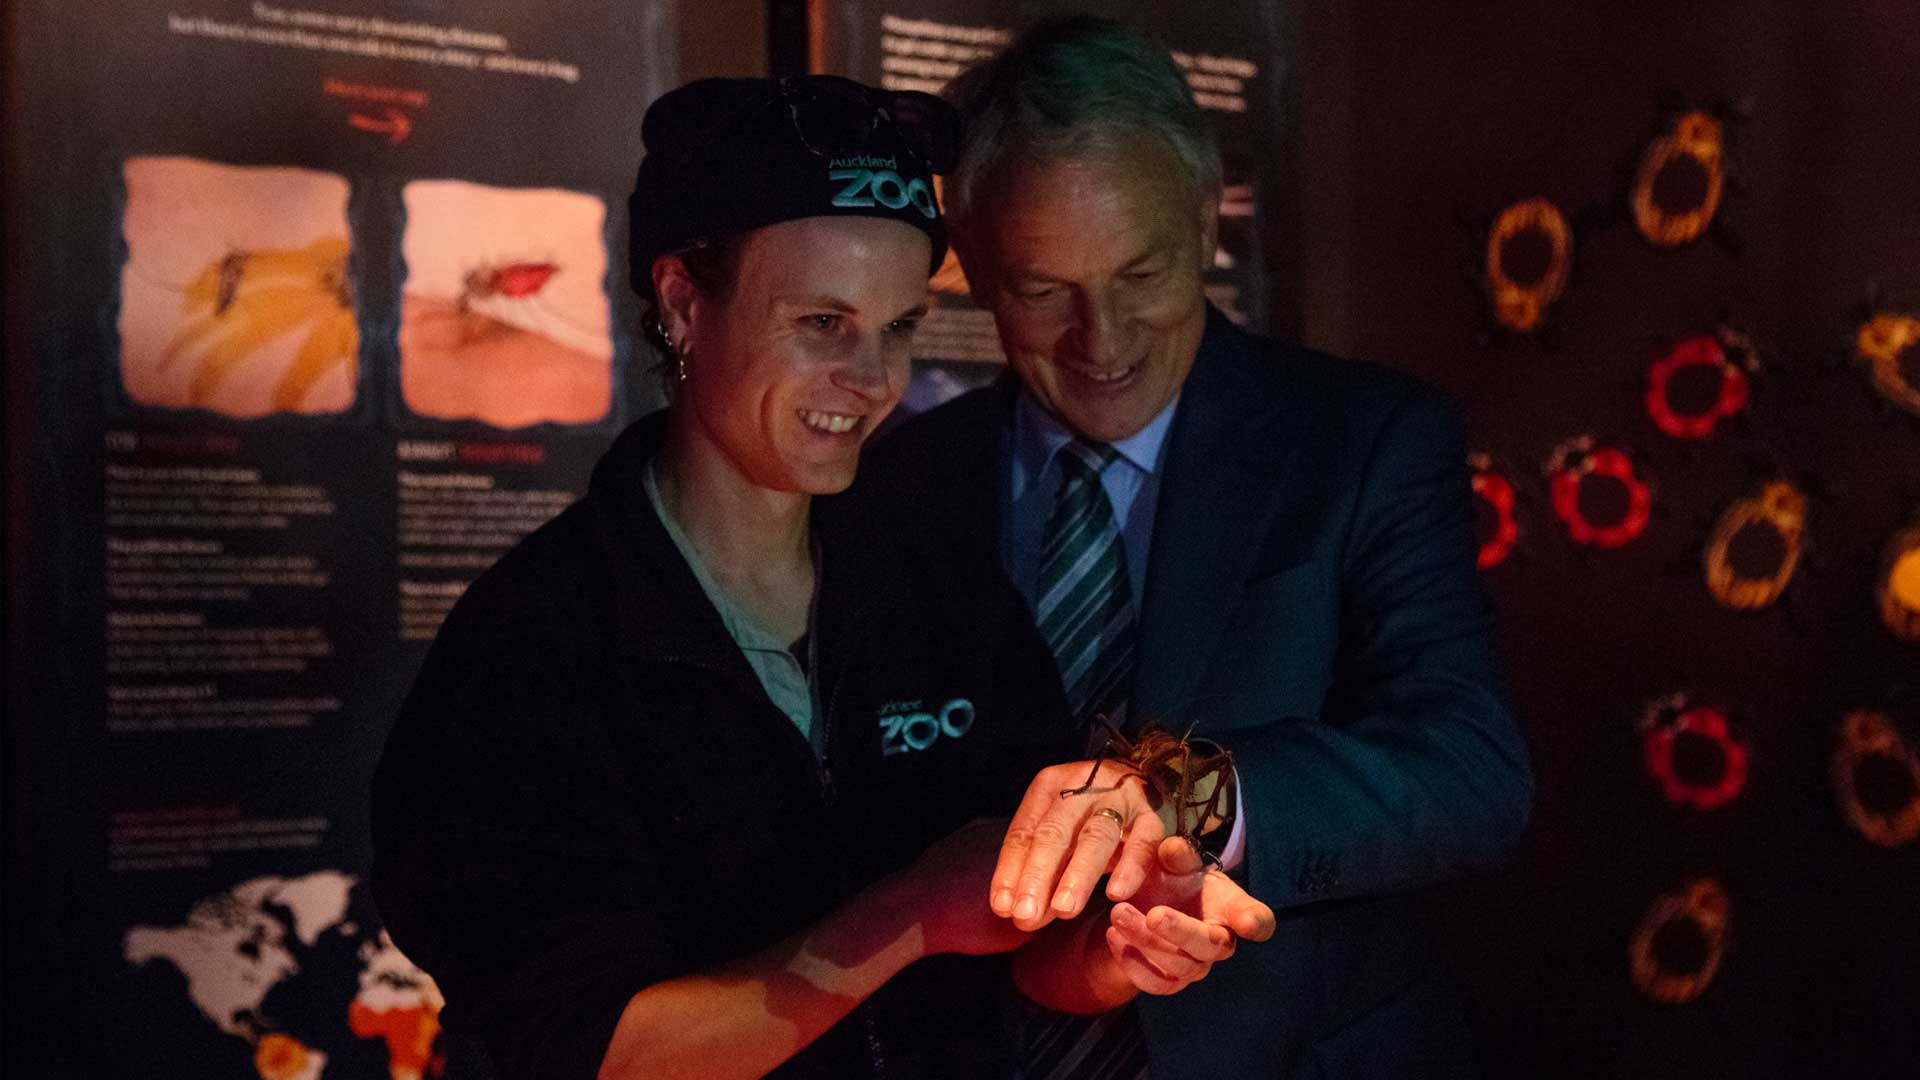 https://cdn.aucklandunlimited.com/zoo/assets/media/official-opening-with-phil-goff-gallery-1.jpg